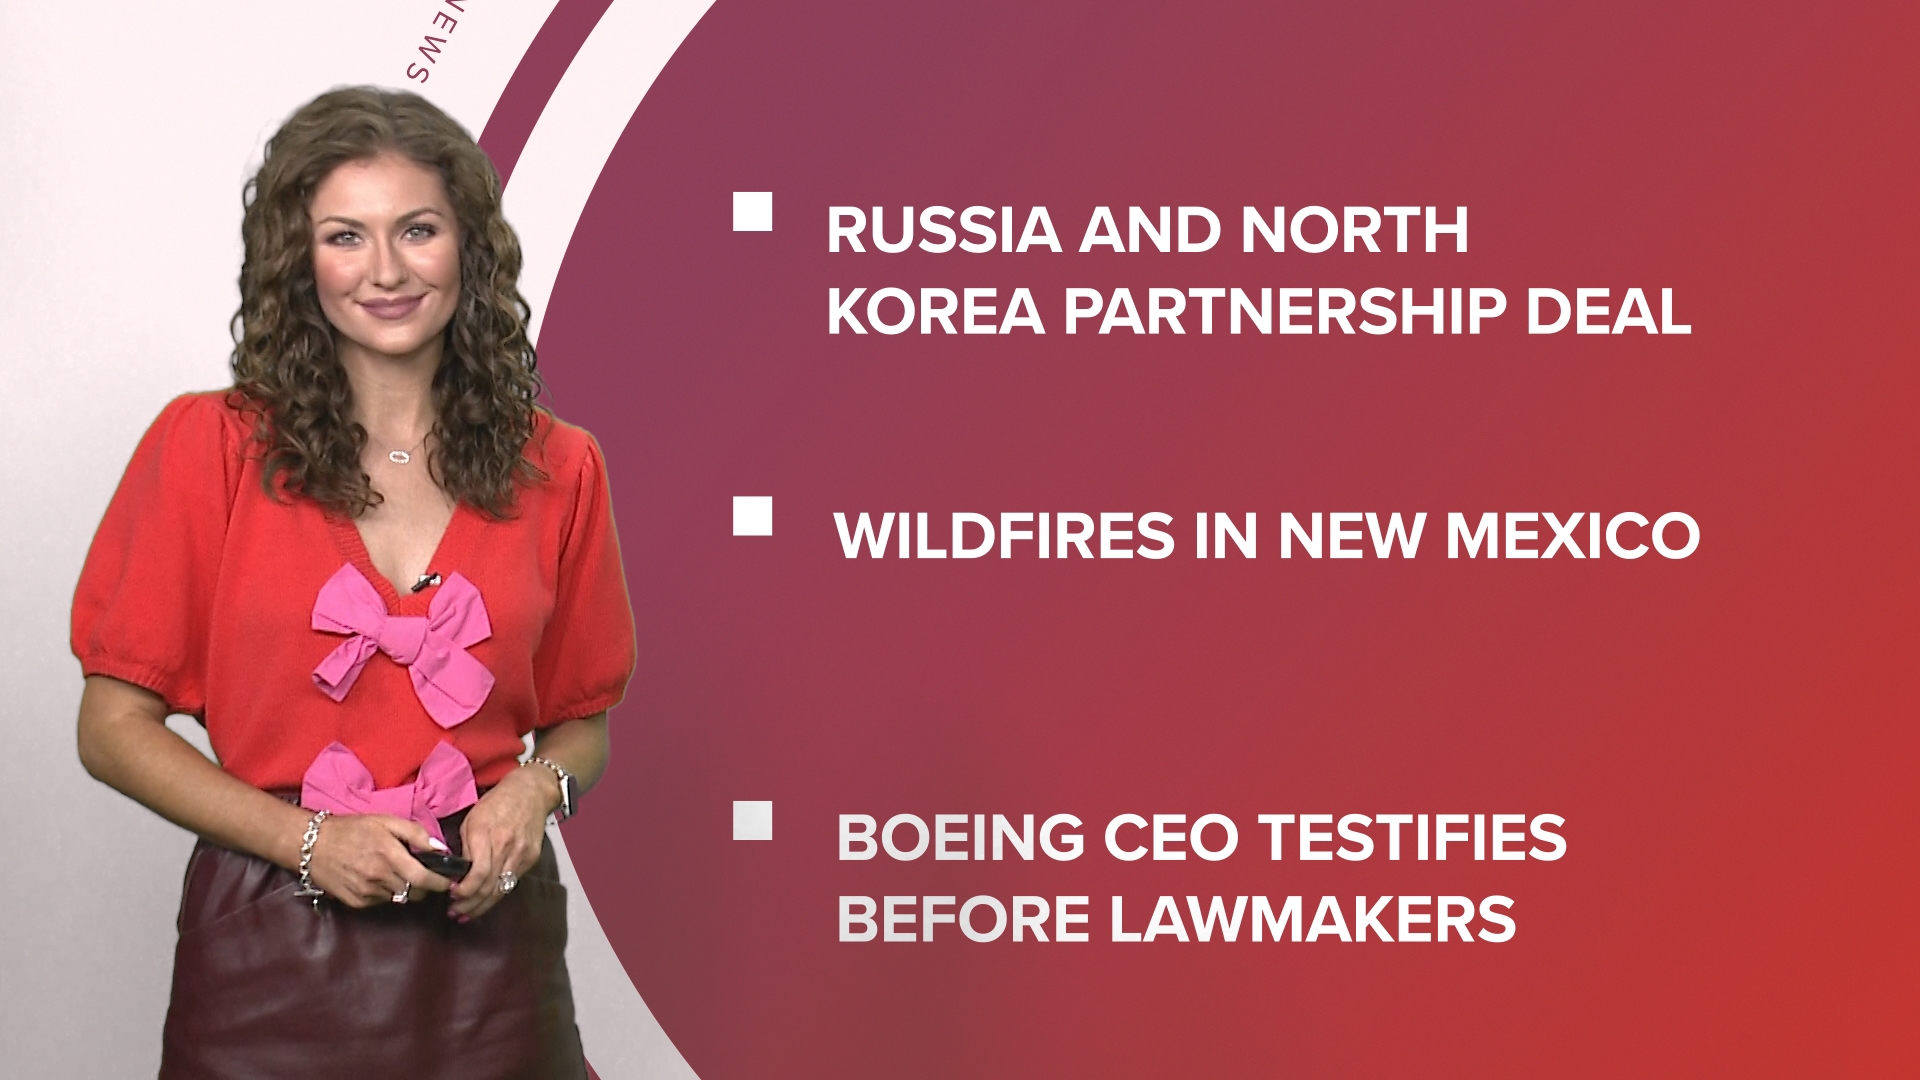 A look at what is happening in the news from Russia and North Korea sign partnership deal to wildfires in New Mexico and celebrating Juneteenth.